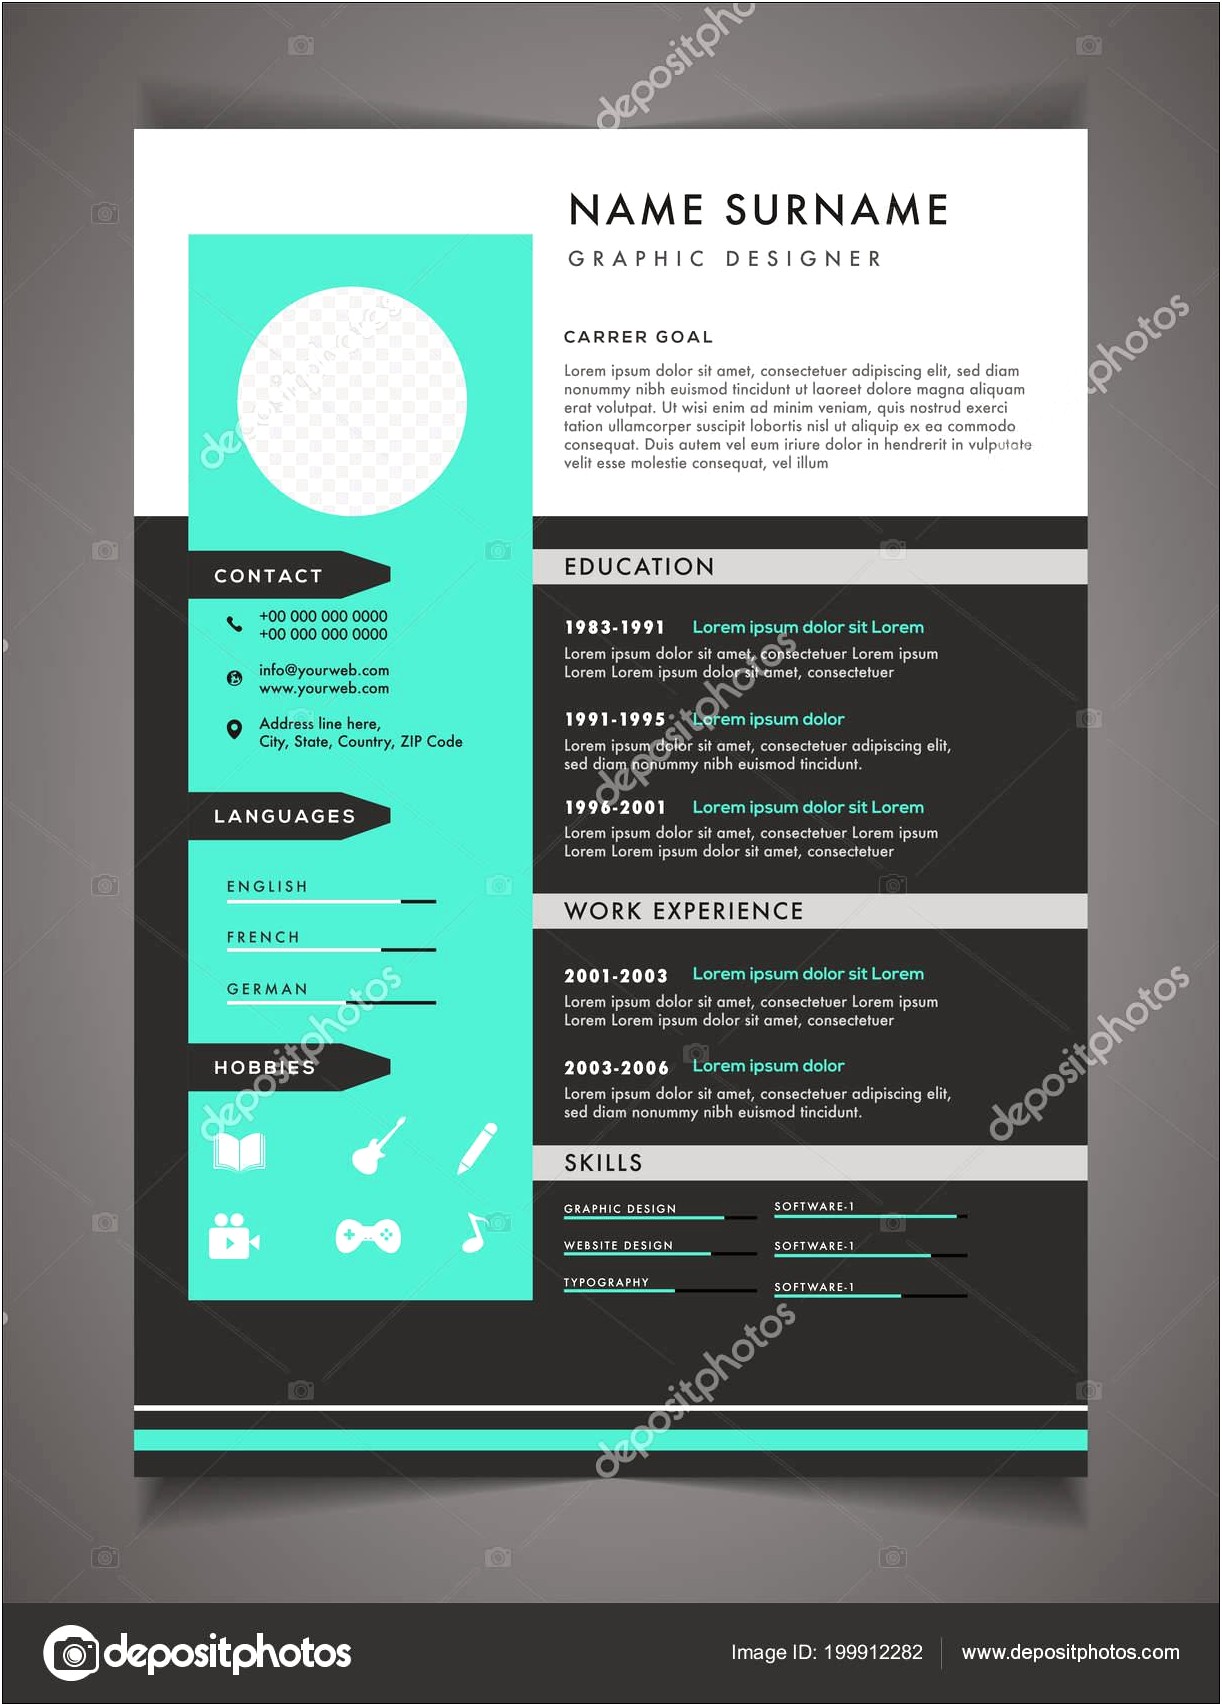 Use Cover Letter With Resume Letterhead